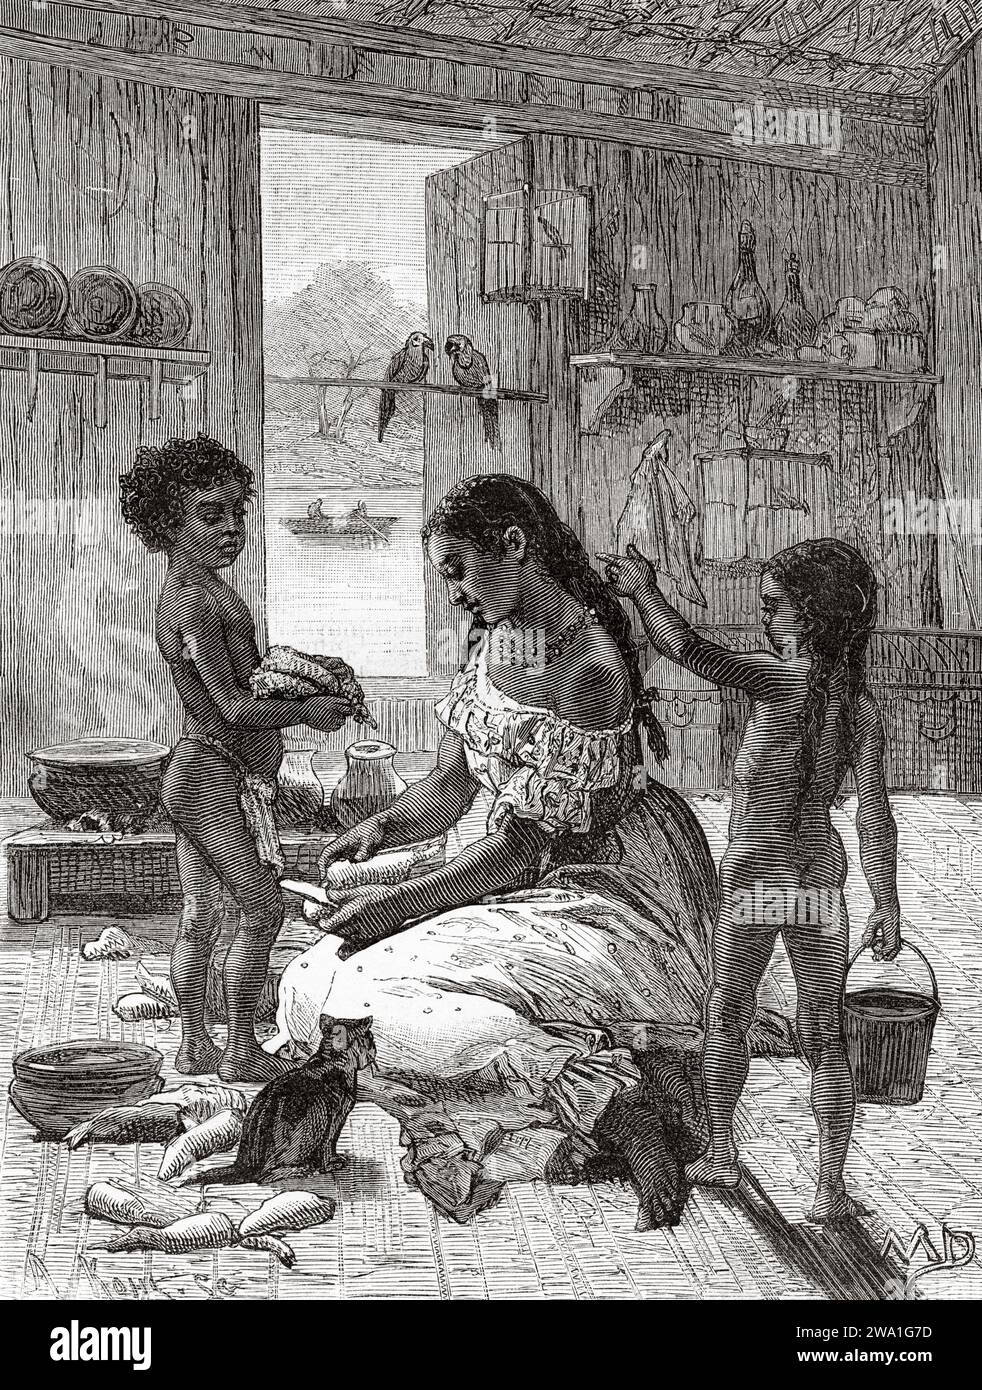 Daily life. Mother with her children inside a house in an indigenous village in province of Darien. Republic of Panama. Central America. Explorations in the Isthmus of Panama and Darien 1876-1878 by Armand Reclus (1843 - 1927) Old 19th century engraving from Le Tour du Monde 1880 Stock Photo